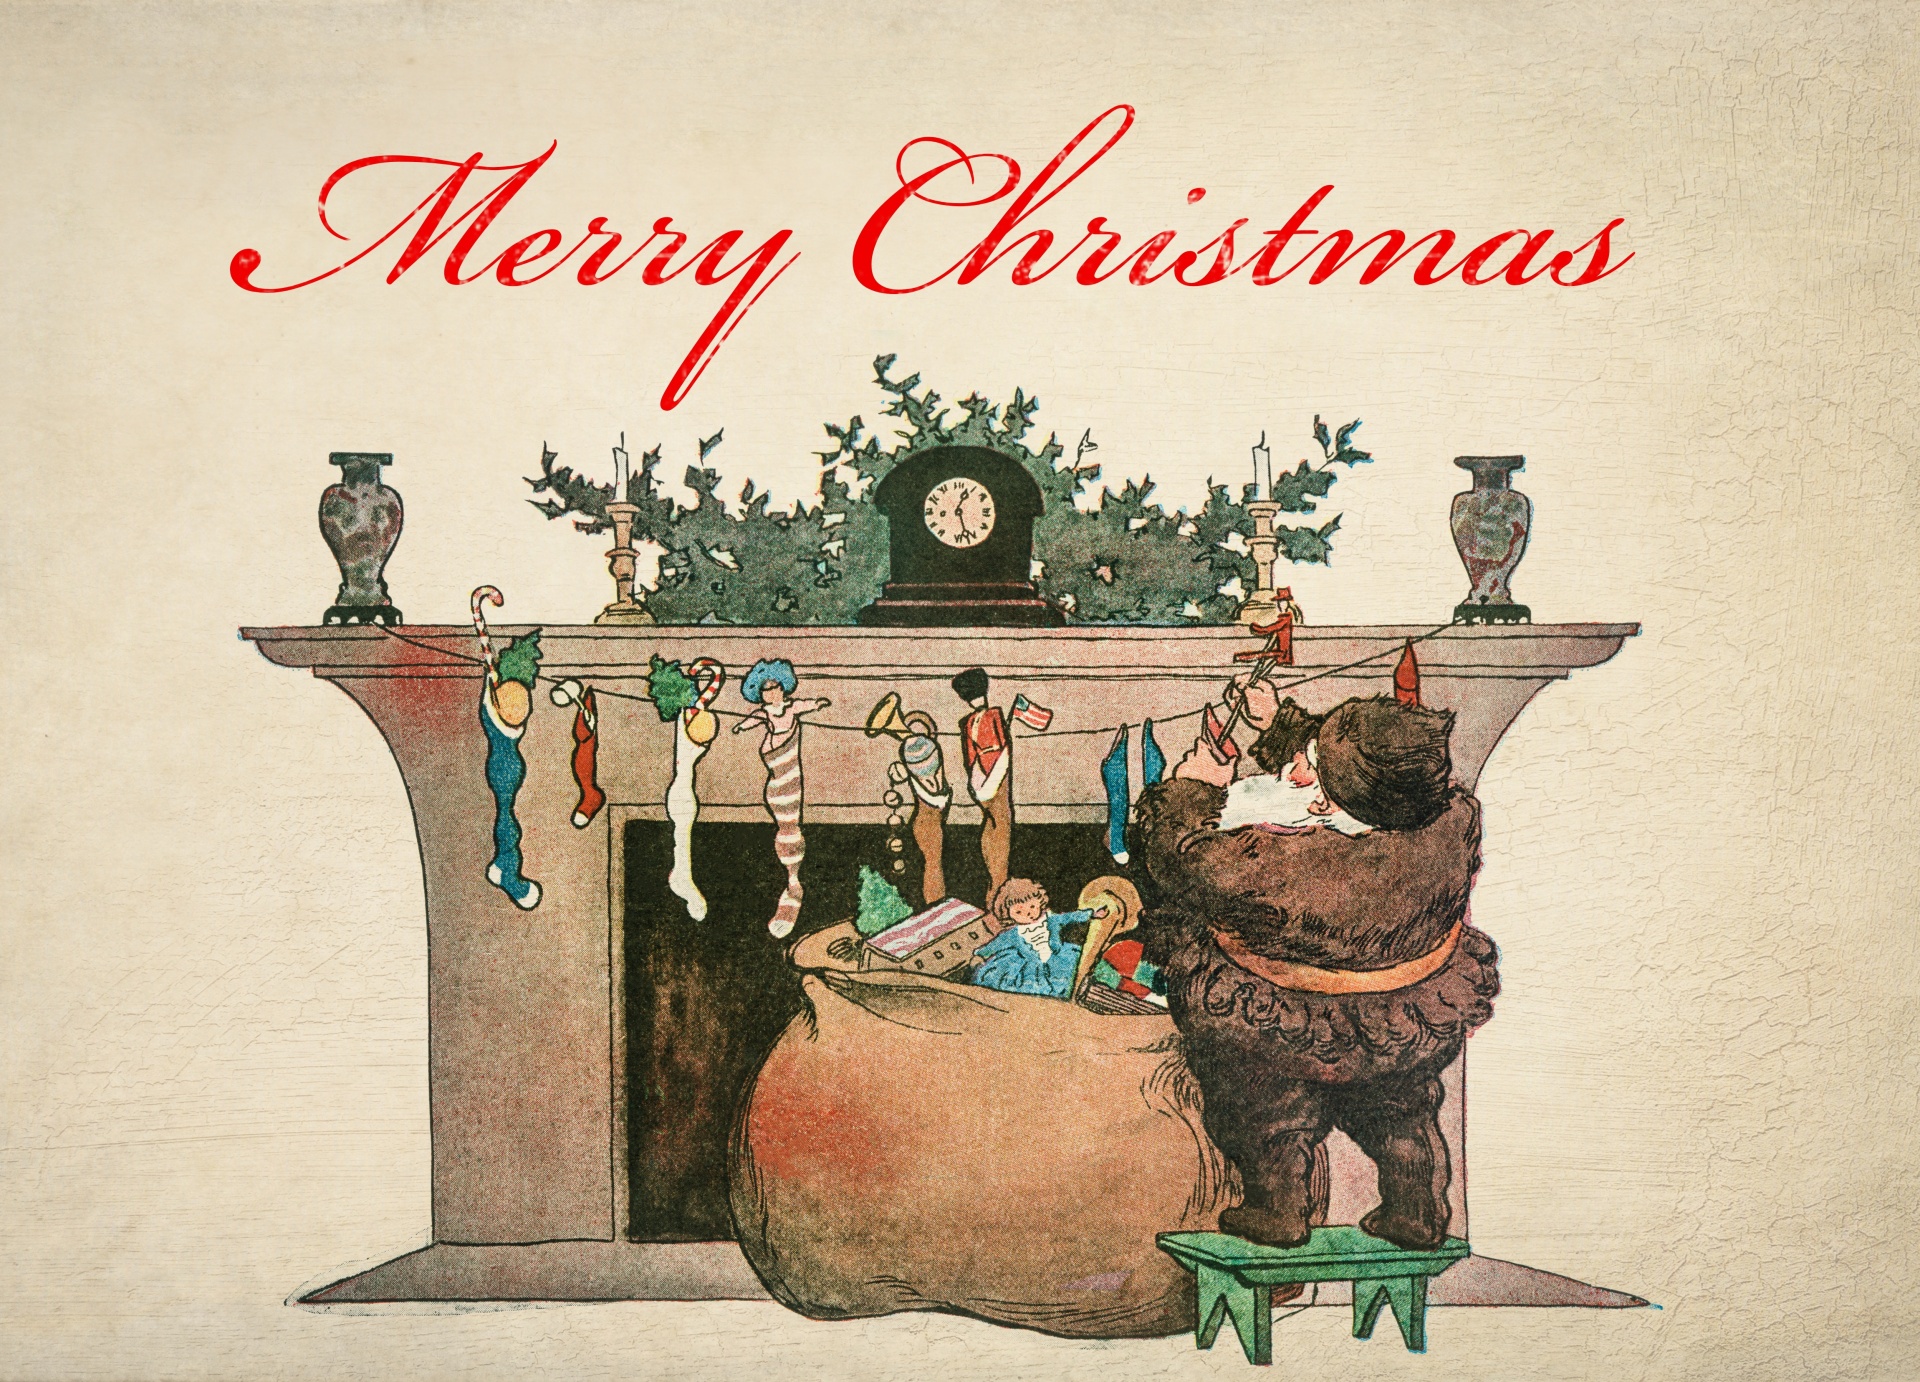 Christmas card Santa Claus fireplace Christmas greetings vintage postcard with clipart on parchment paper